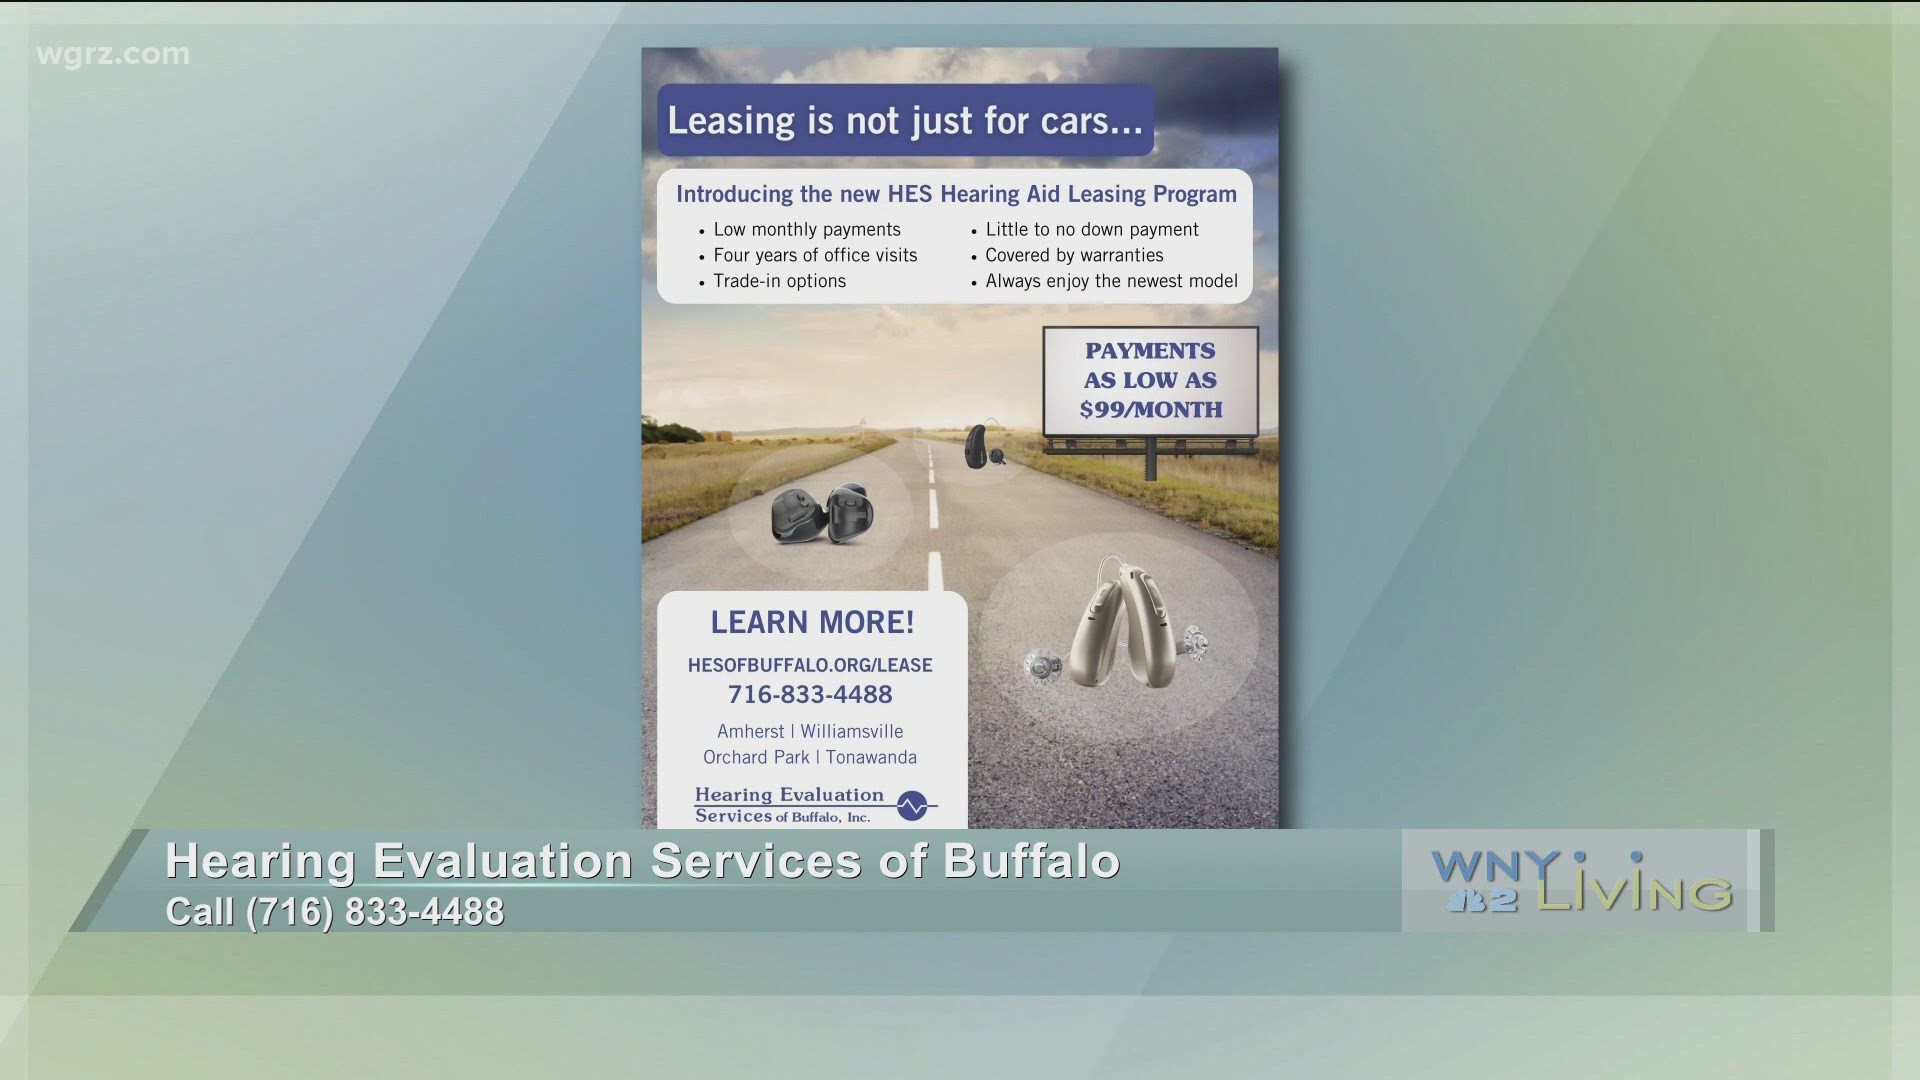 WNY Living - November 28 - Hearing Evaluation Services of Buffalo (THIS VIDEO IS SPONSORED BY HEARING EVALUATION SERVICES OF BUFFALO)